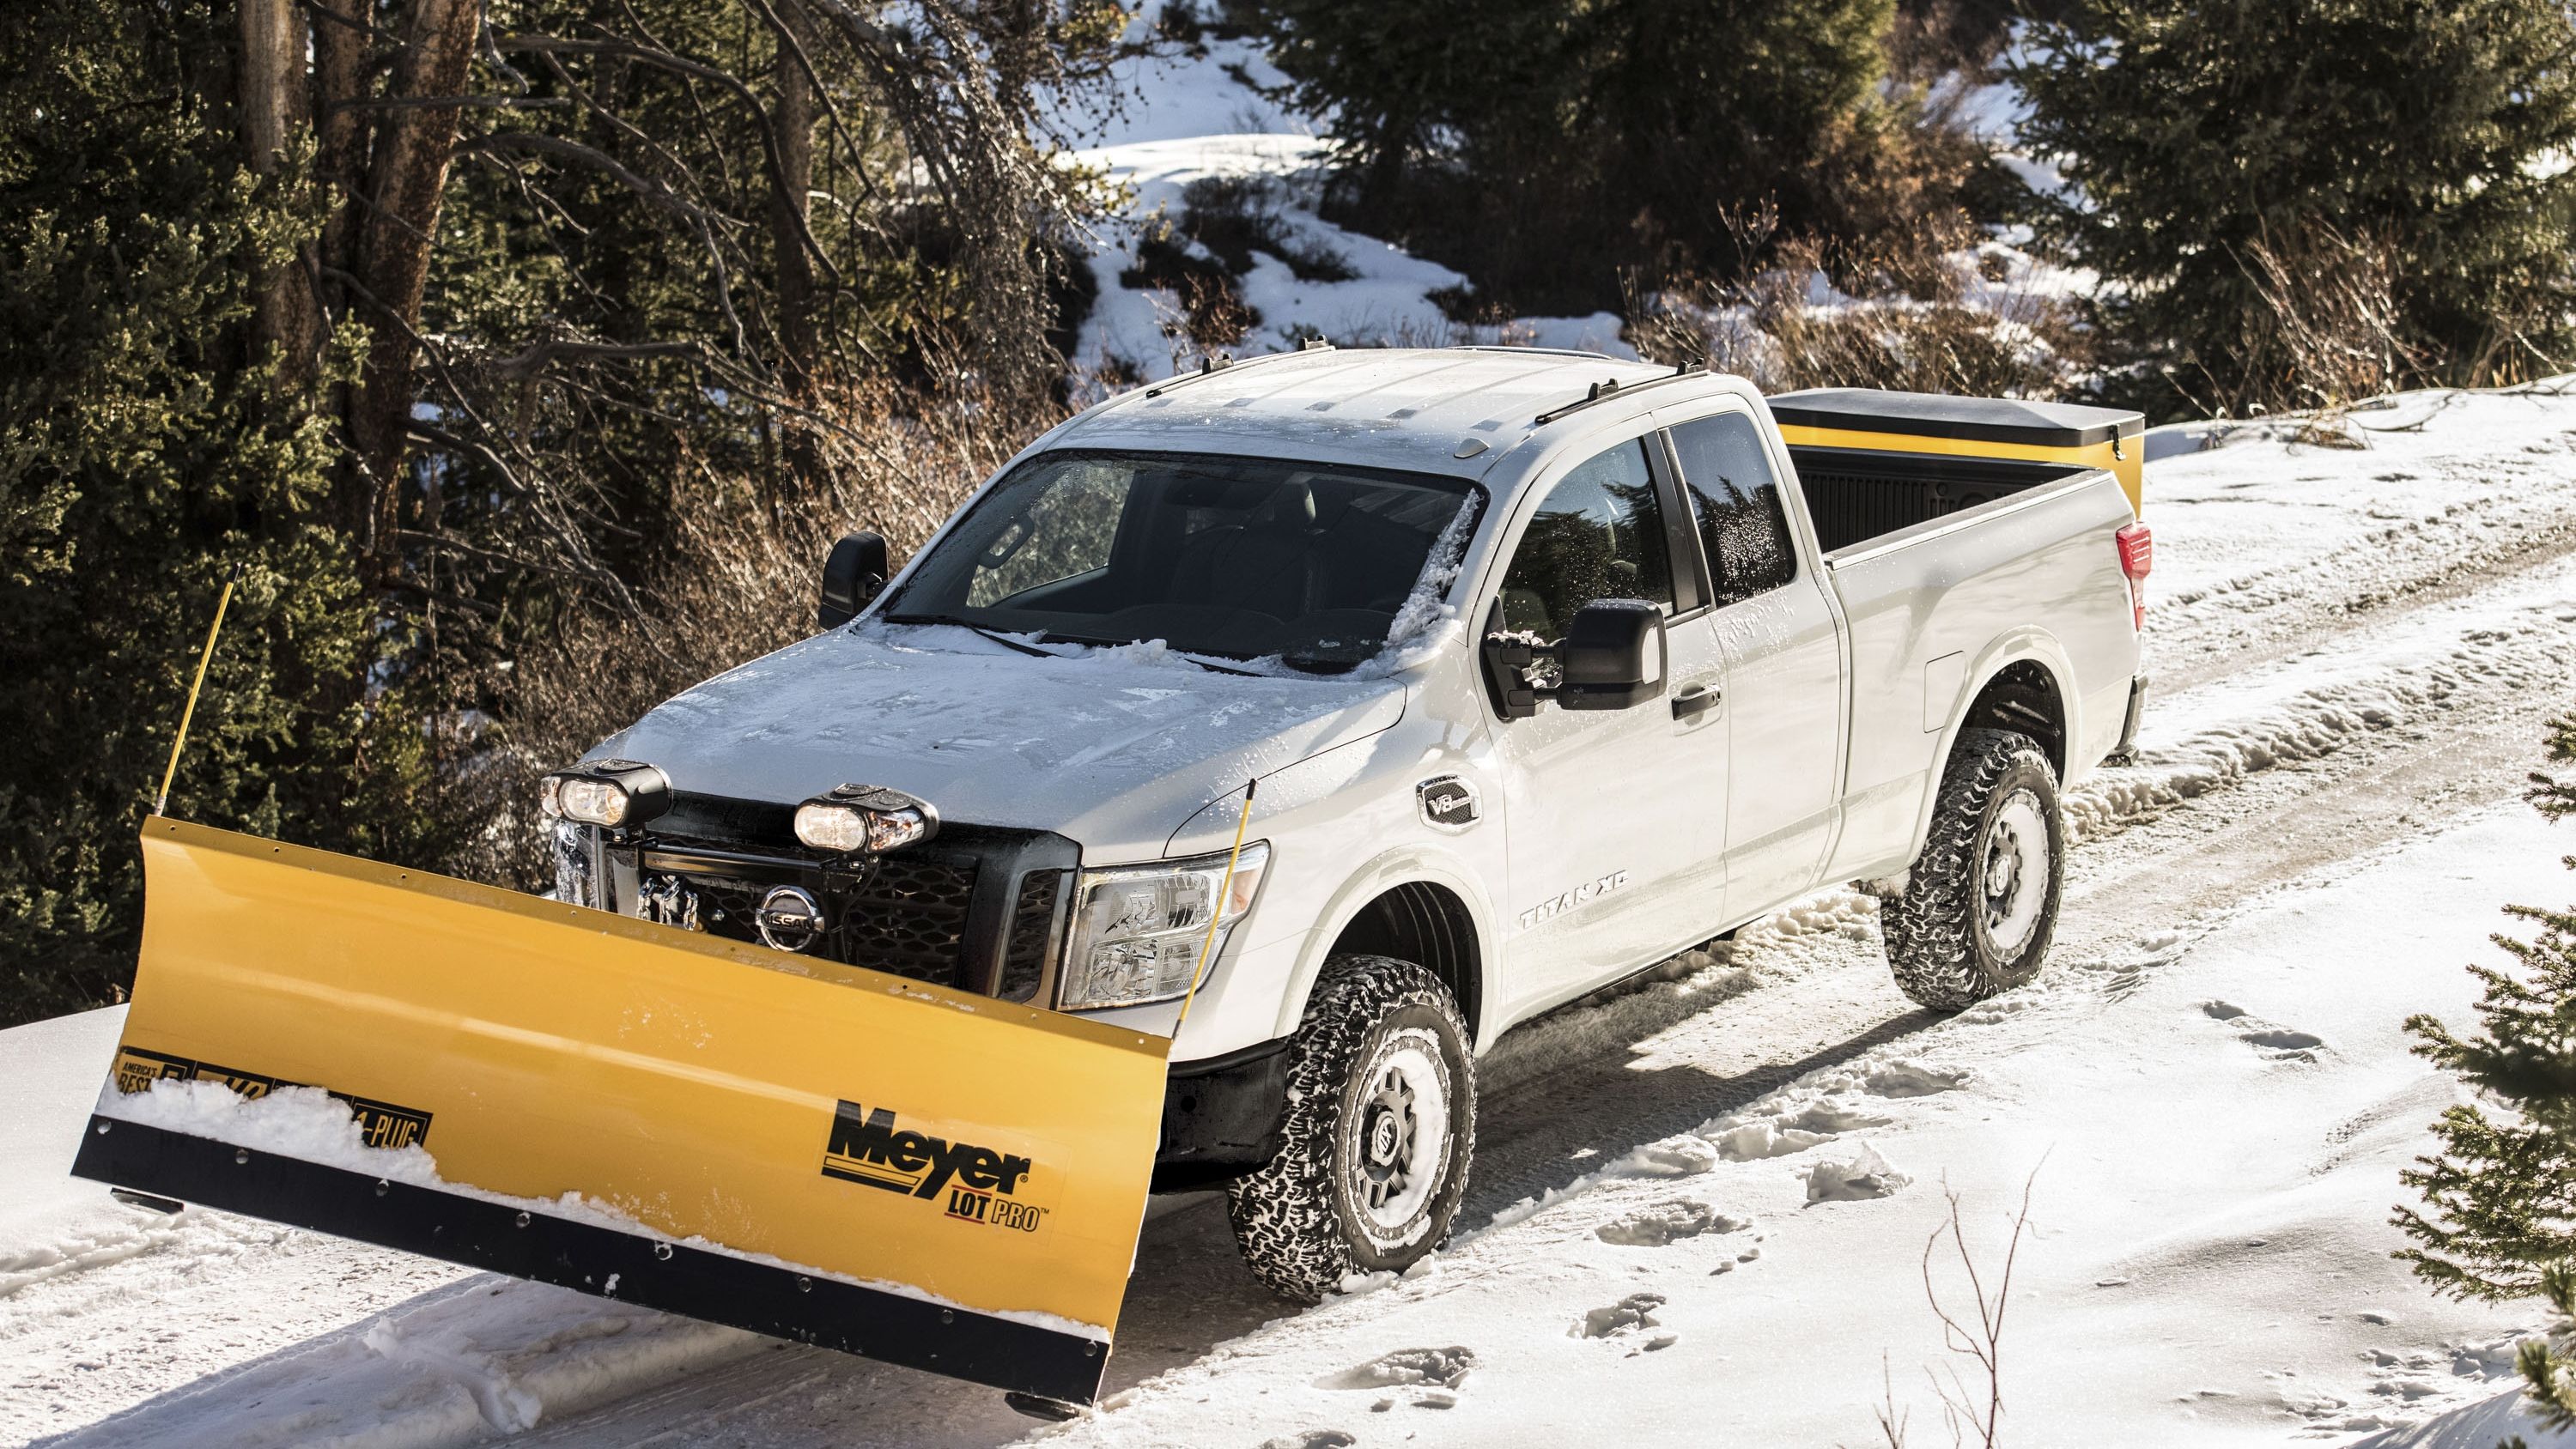 2017 Nissan Titan XD Snow Plow Package Is Ready for a White Christmas